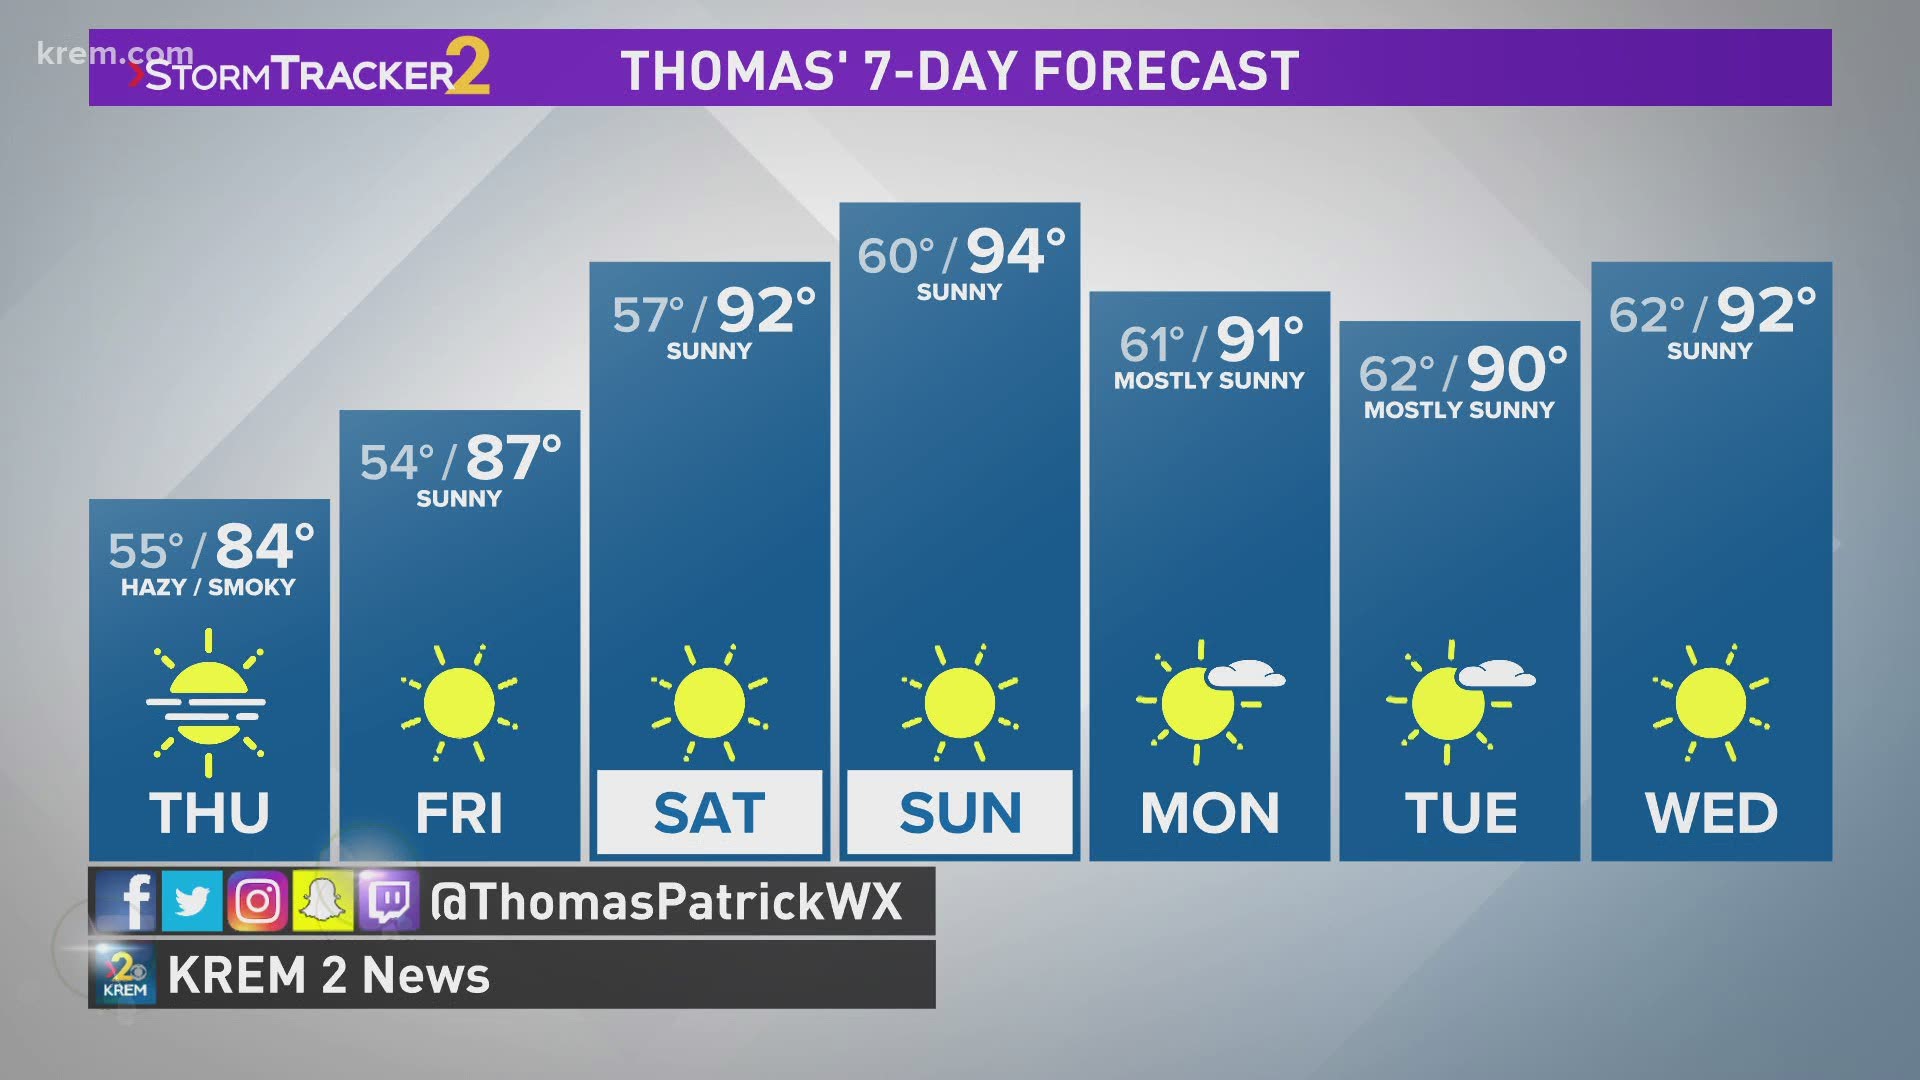 KREM 2's Thomas Patrick has the weekday forecast for the Inland Northwest on July 21, 2021 at 6 p.m.